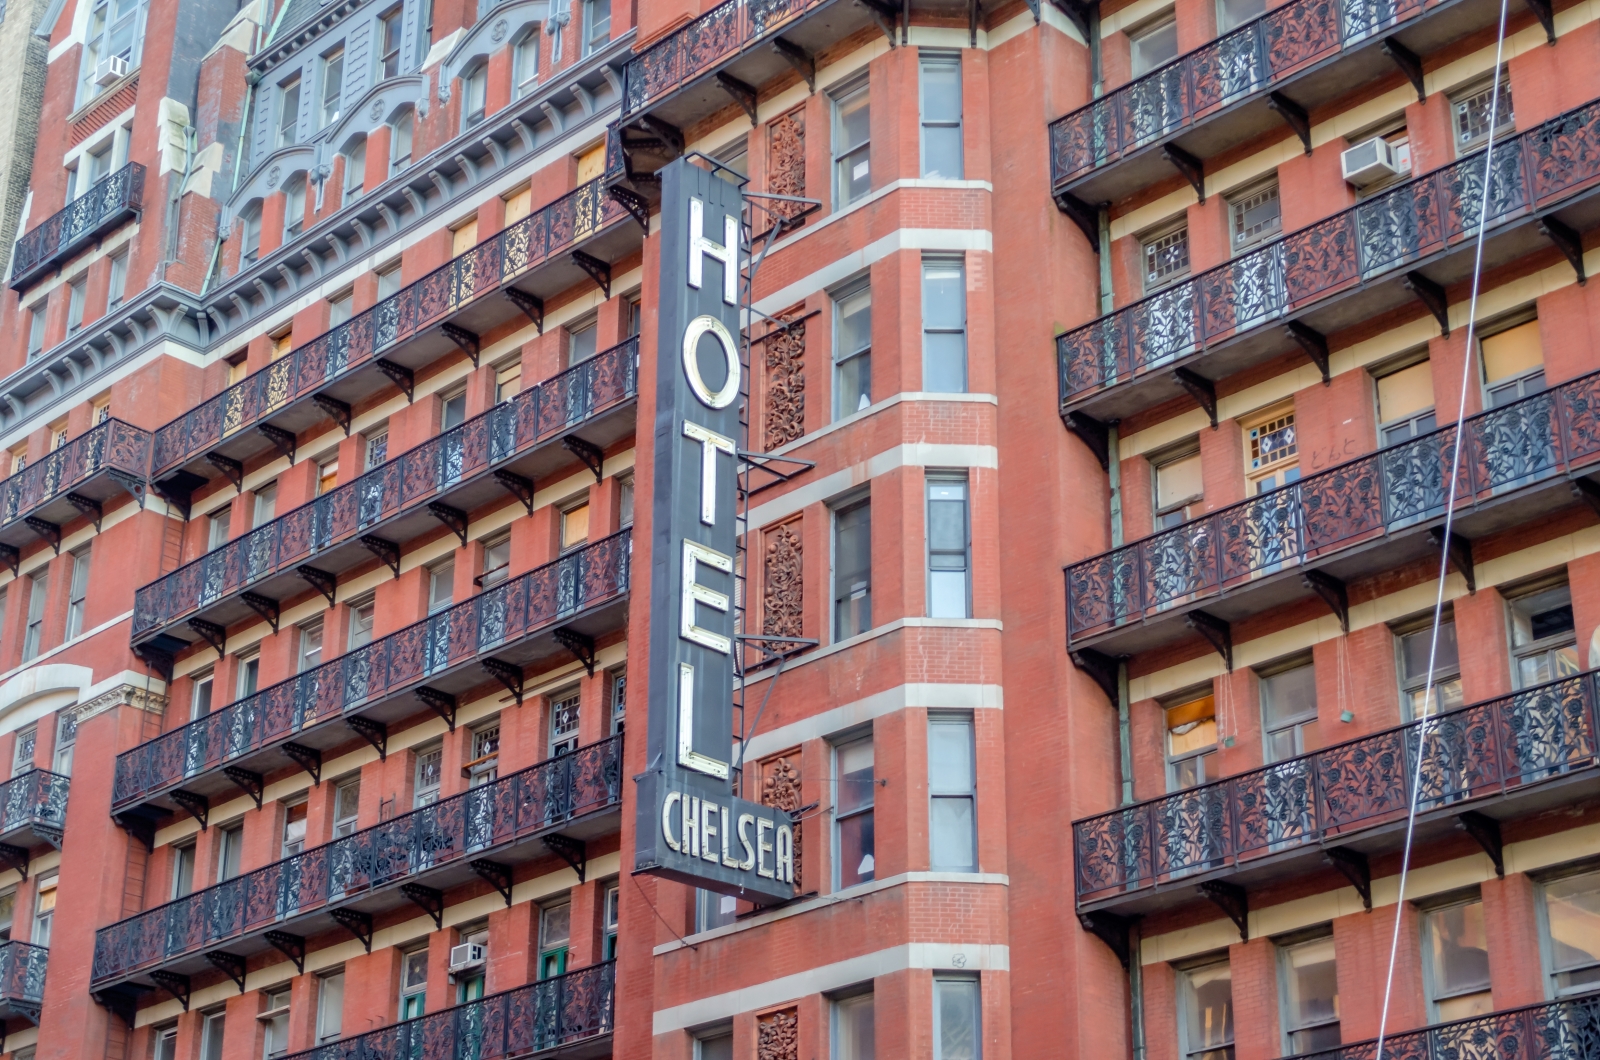 image of the Chelsea Hotel in New York City